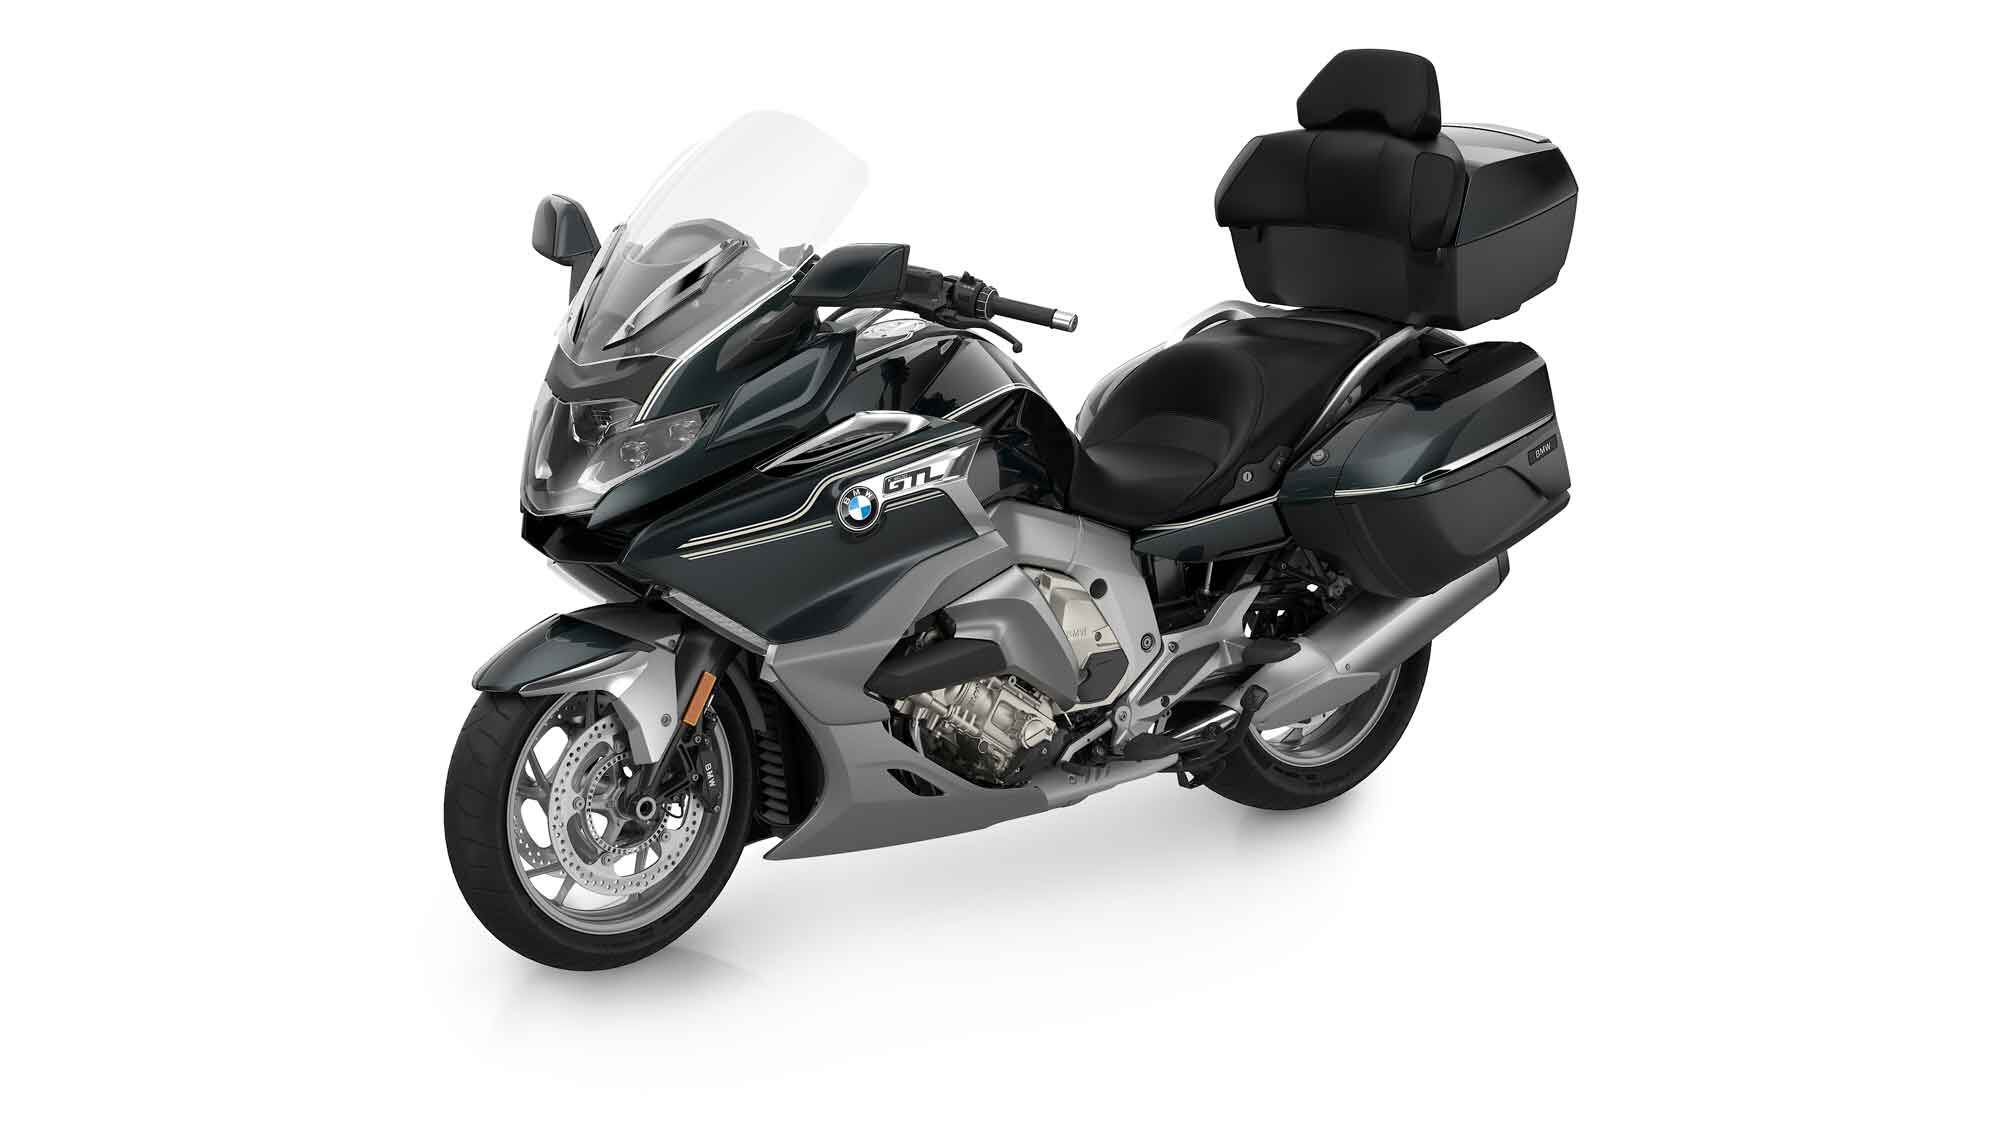 The BMW K 1600 GTL packs an ultrasmooth inline-six that puts out 133 lb.-ft. of torque.